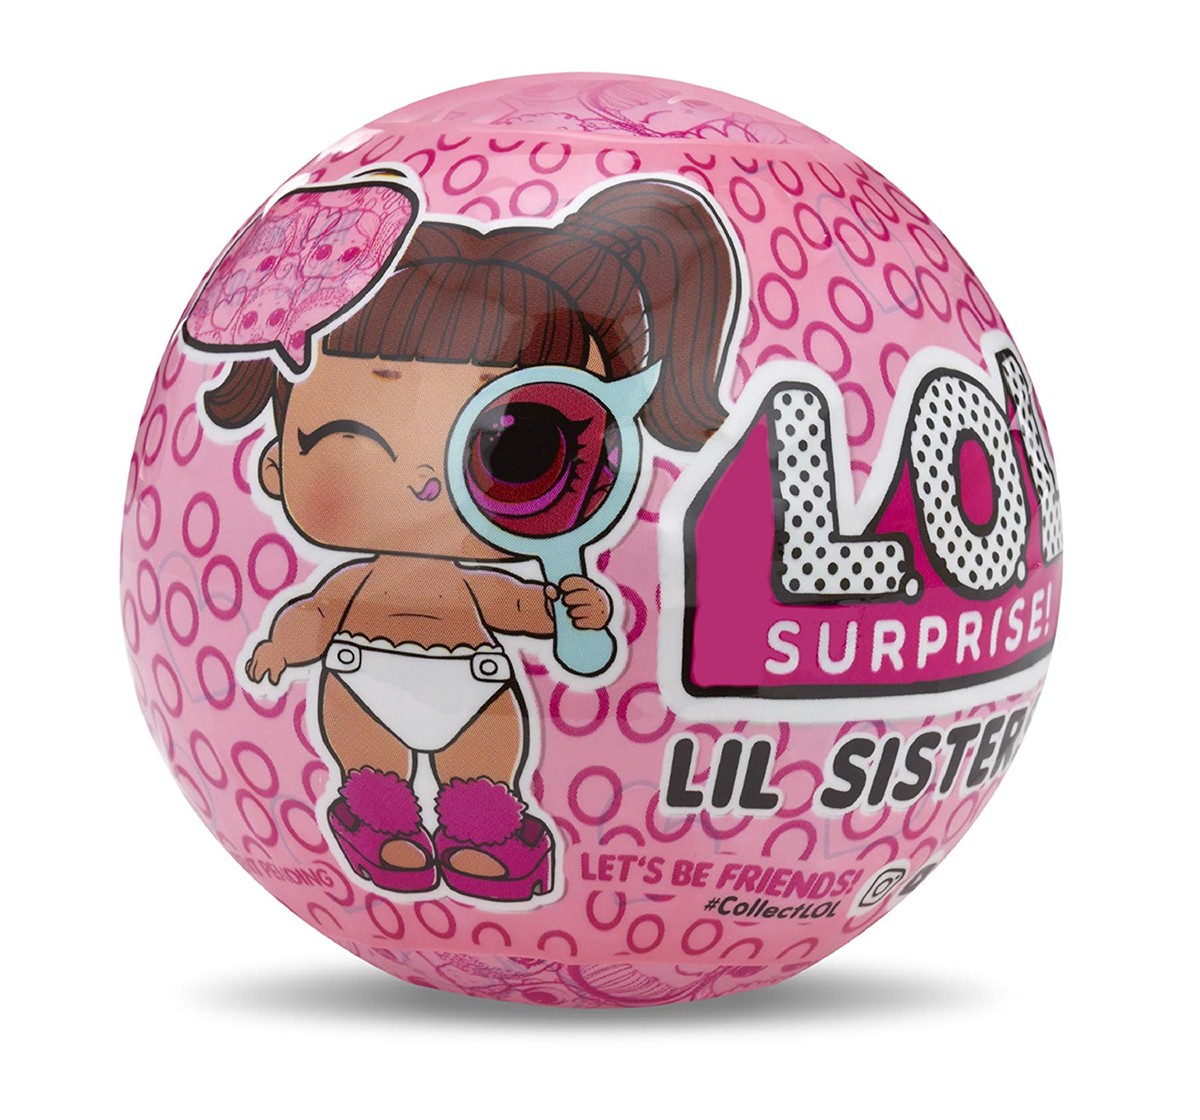 L.O.L. Surprise! Lil Sisters Ball Eye Spy Series Collectible Dolls for Kids age 3Y+ 